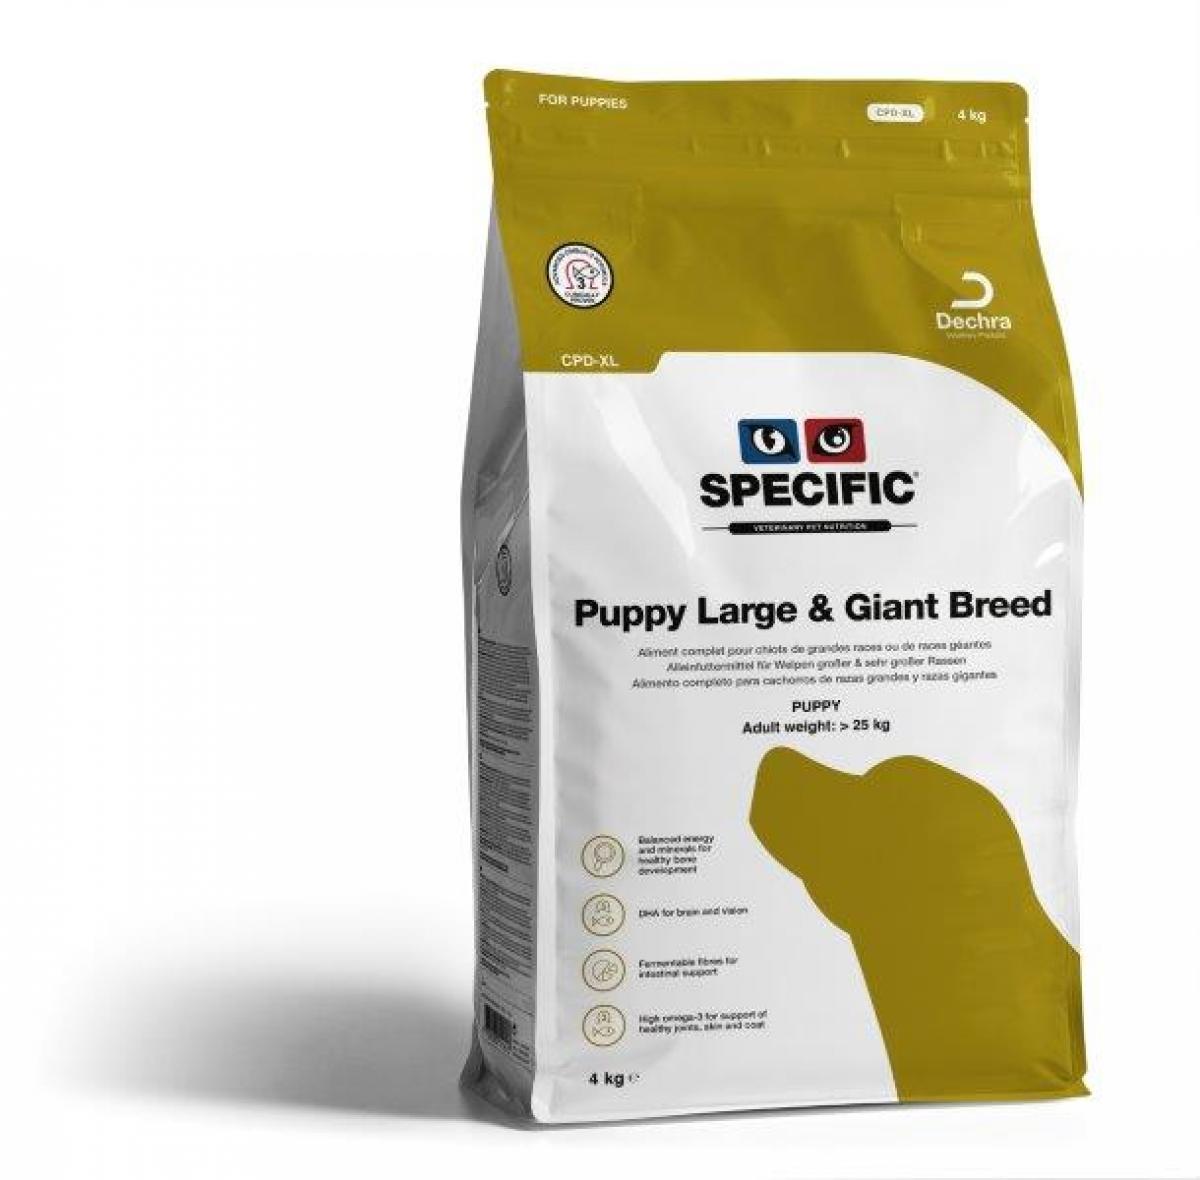 Specific CPD-XL Puppy large &amp;amp; giant breed 4kg